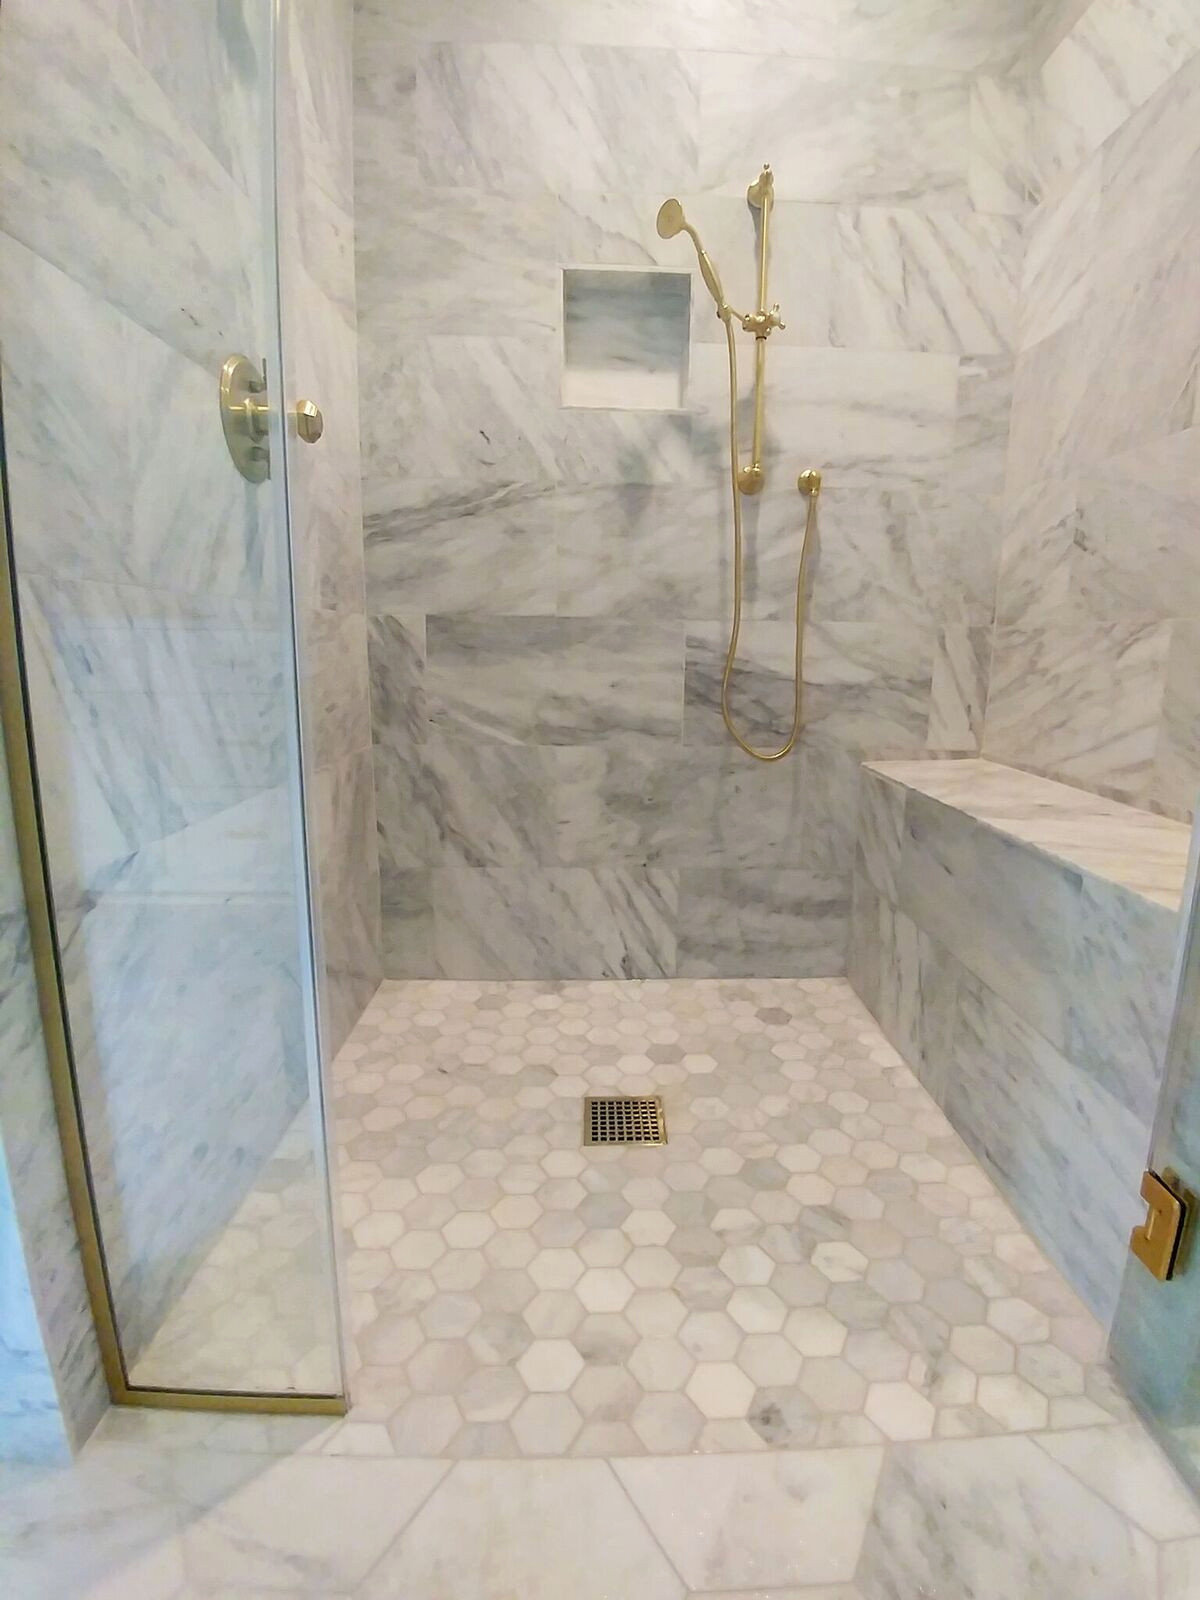 Level Entry / Curb-less Showers